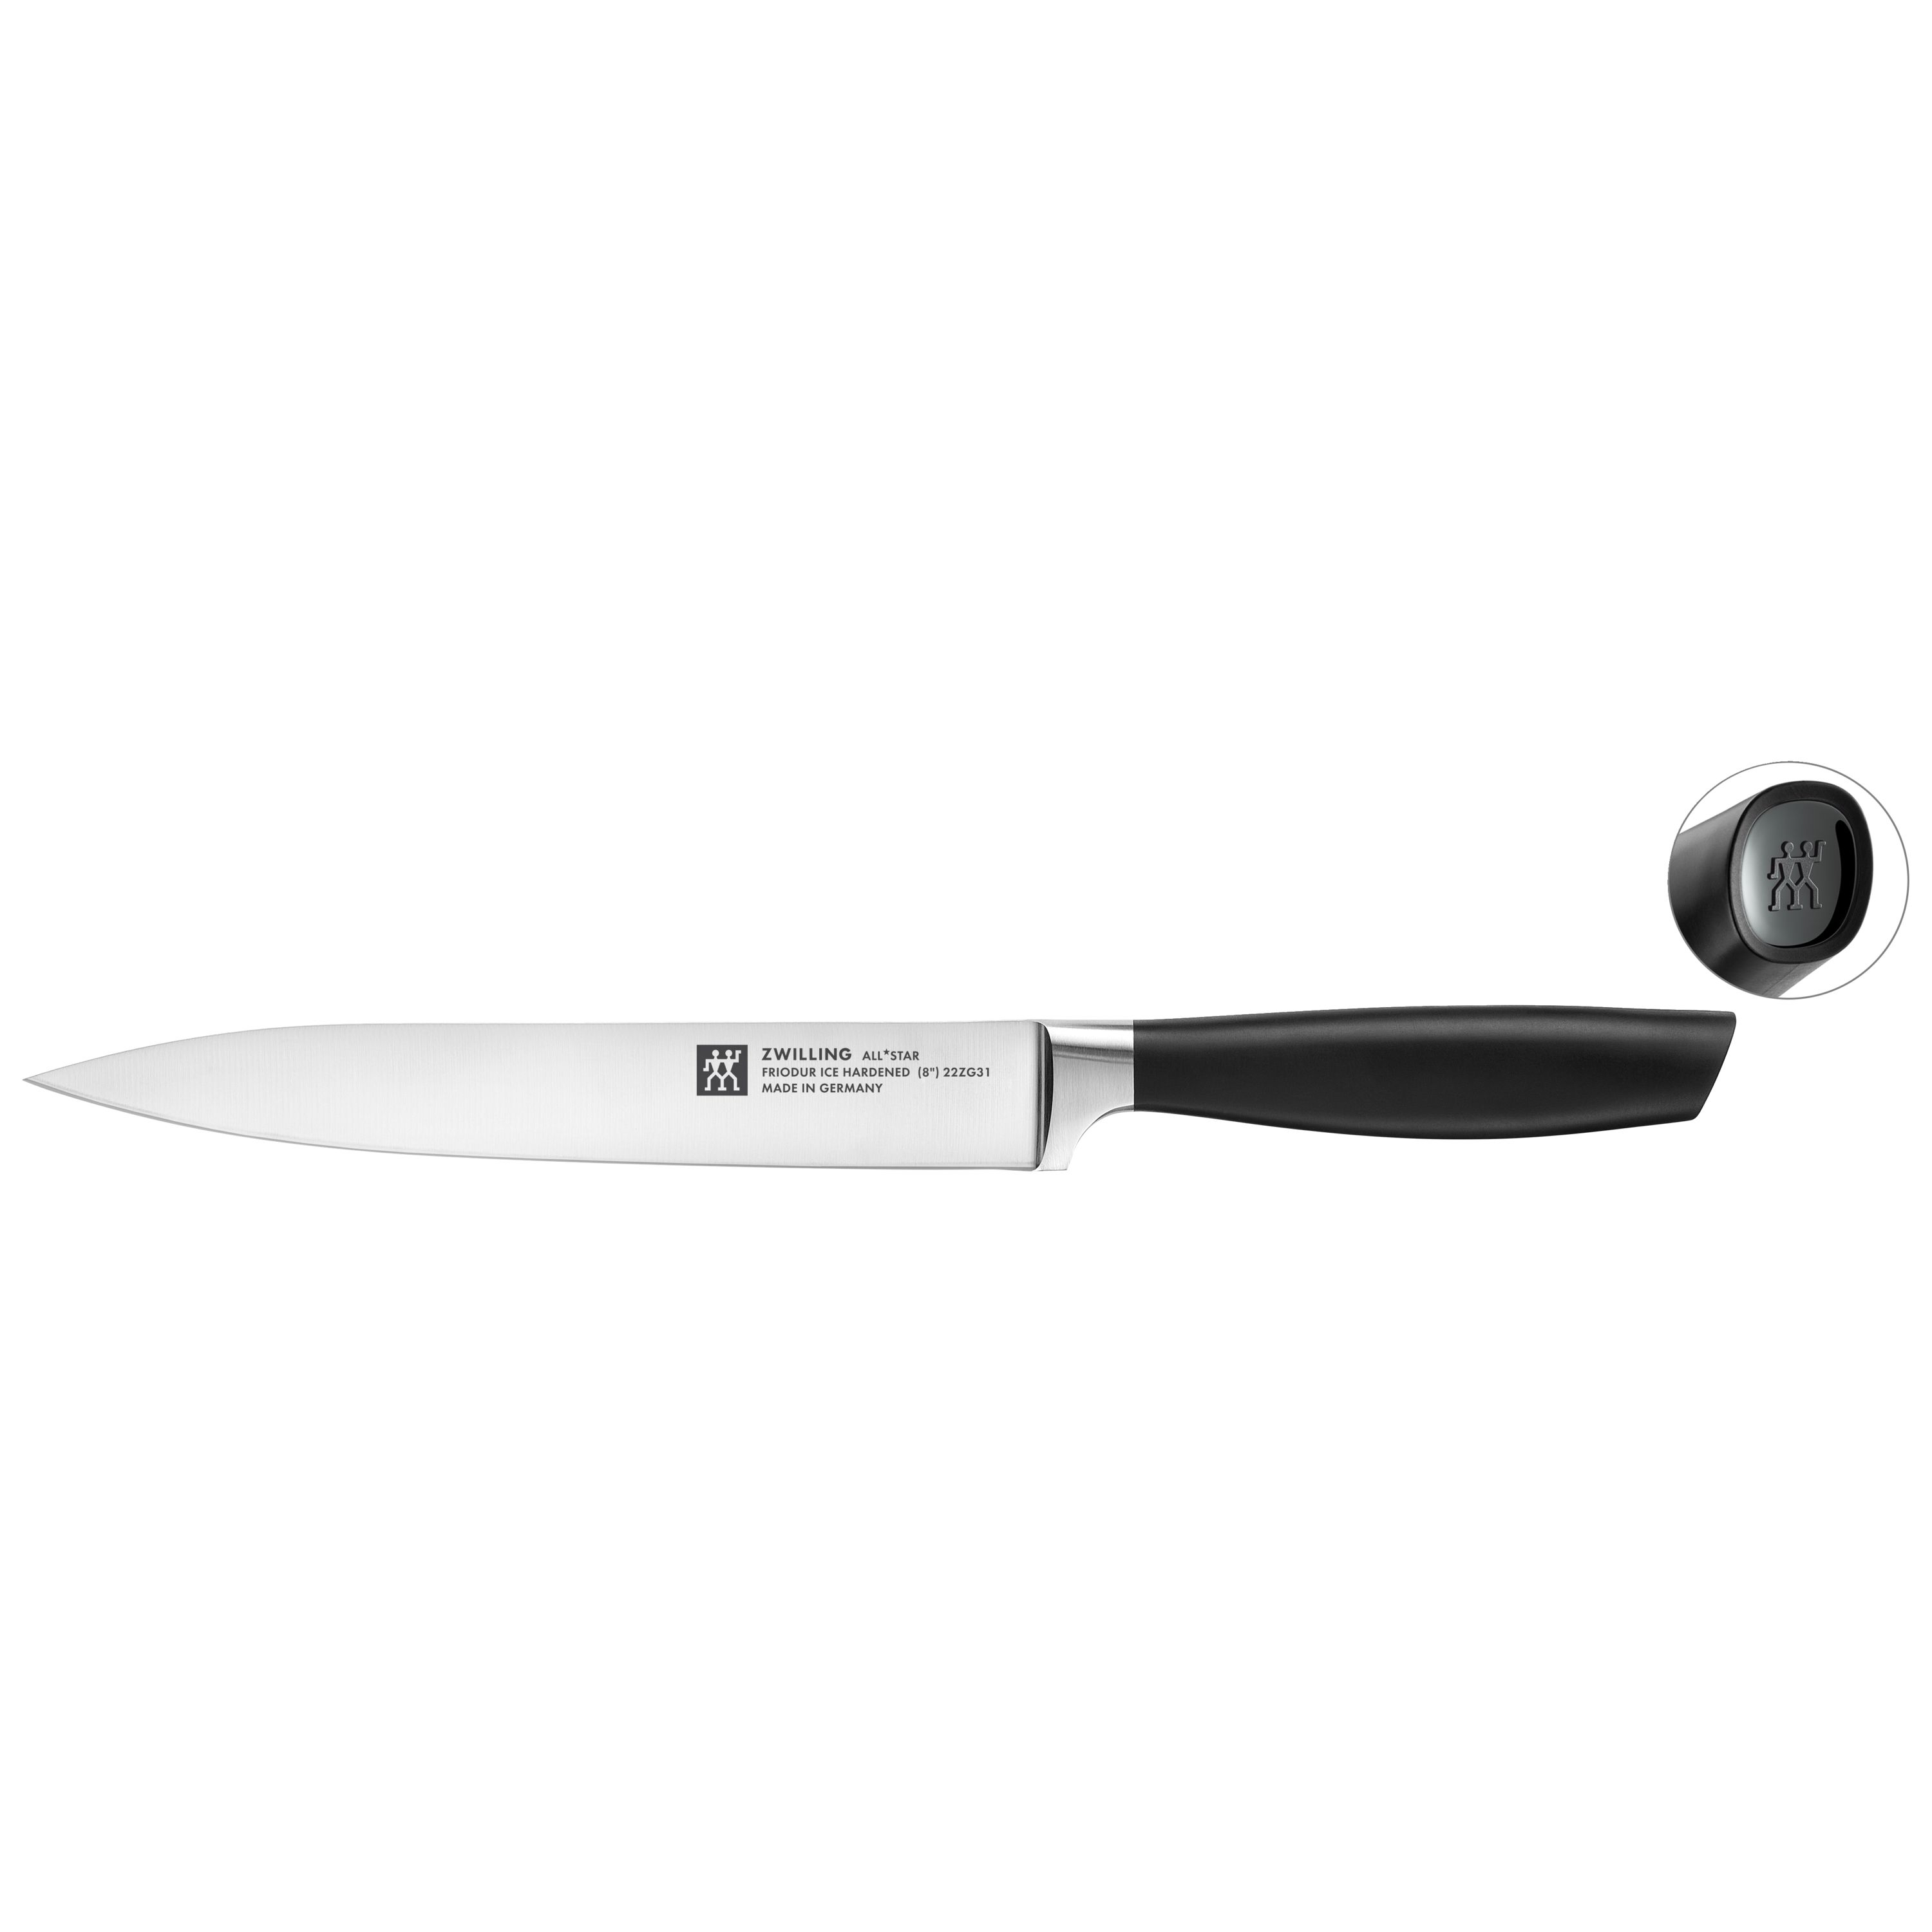 Zwilling Four Star 8-inch, Slicing/Carving Knife